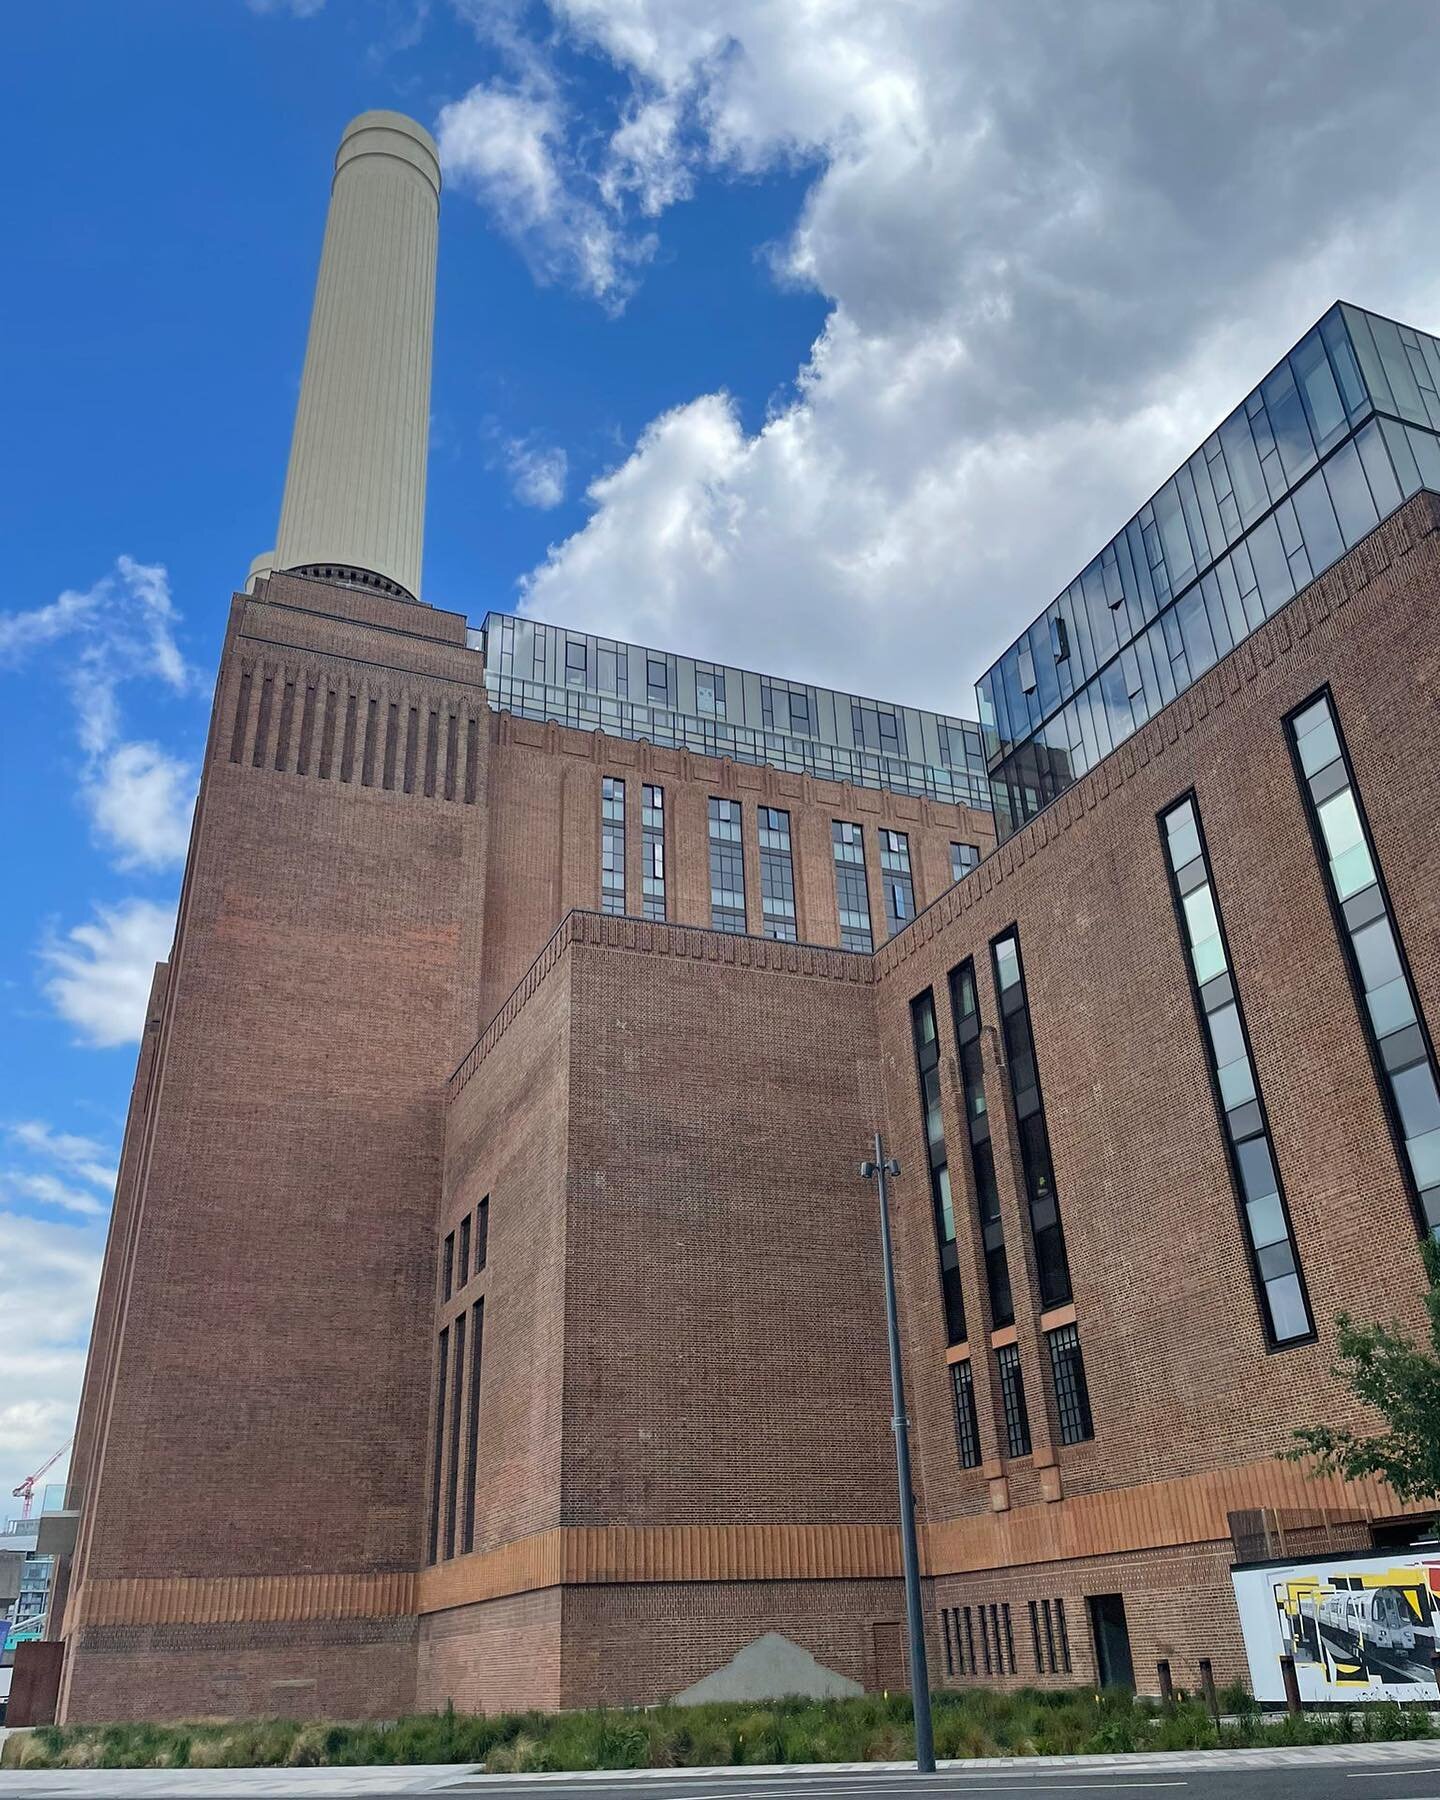 Behind the scenes at the brand new Battersea Power Station development.. rumour has it, some big brands will be taking space here, and after our sneak peak at their early designs, we're not surprised 🤩

#BatterseaPowerStation #OfficeAndRetail #Prope